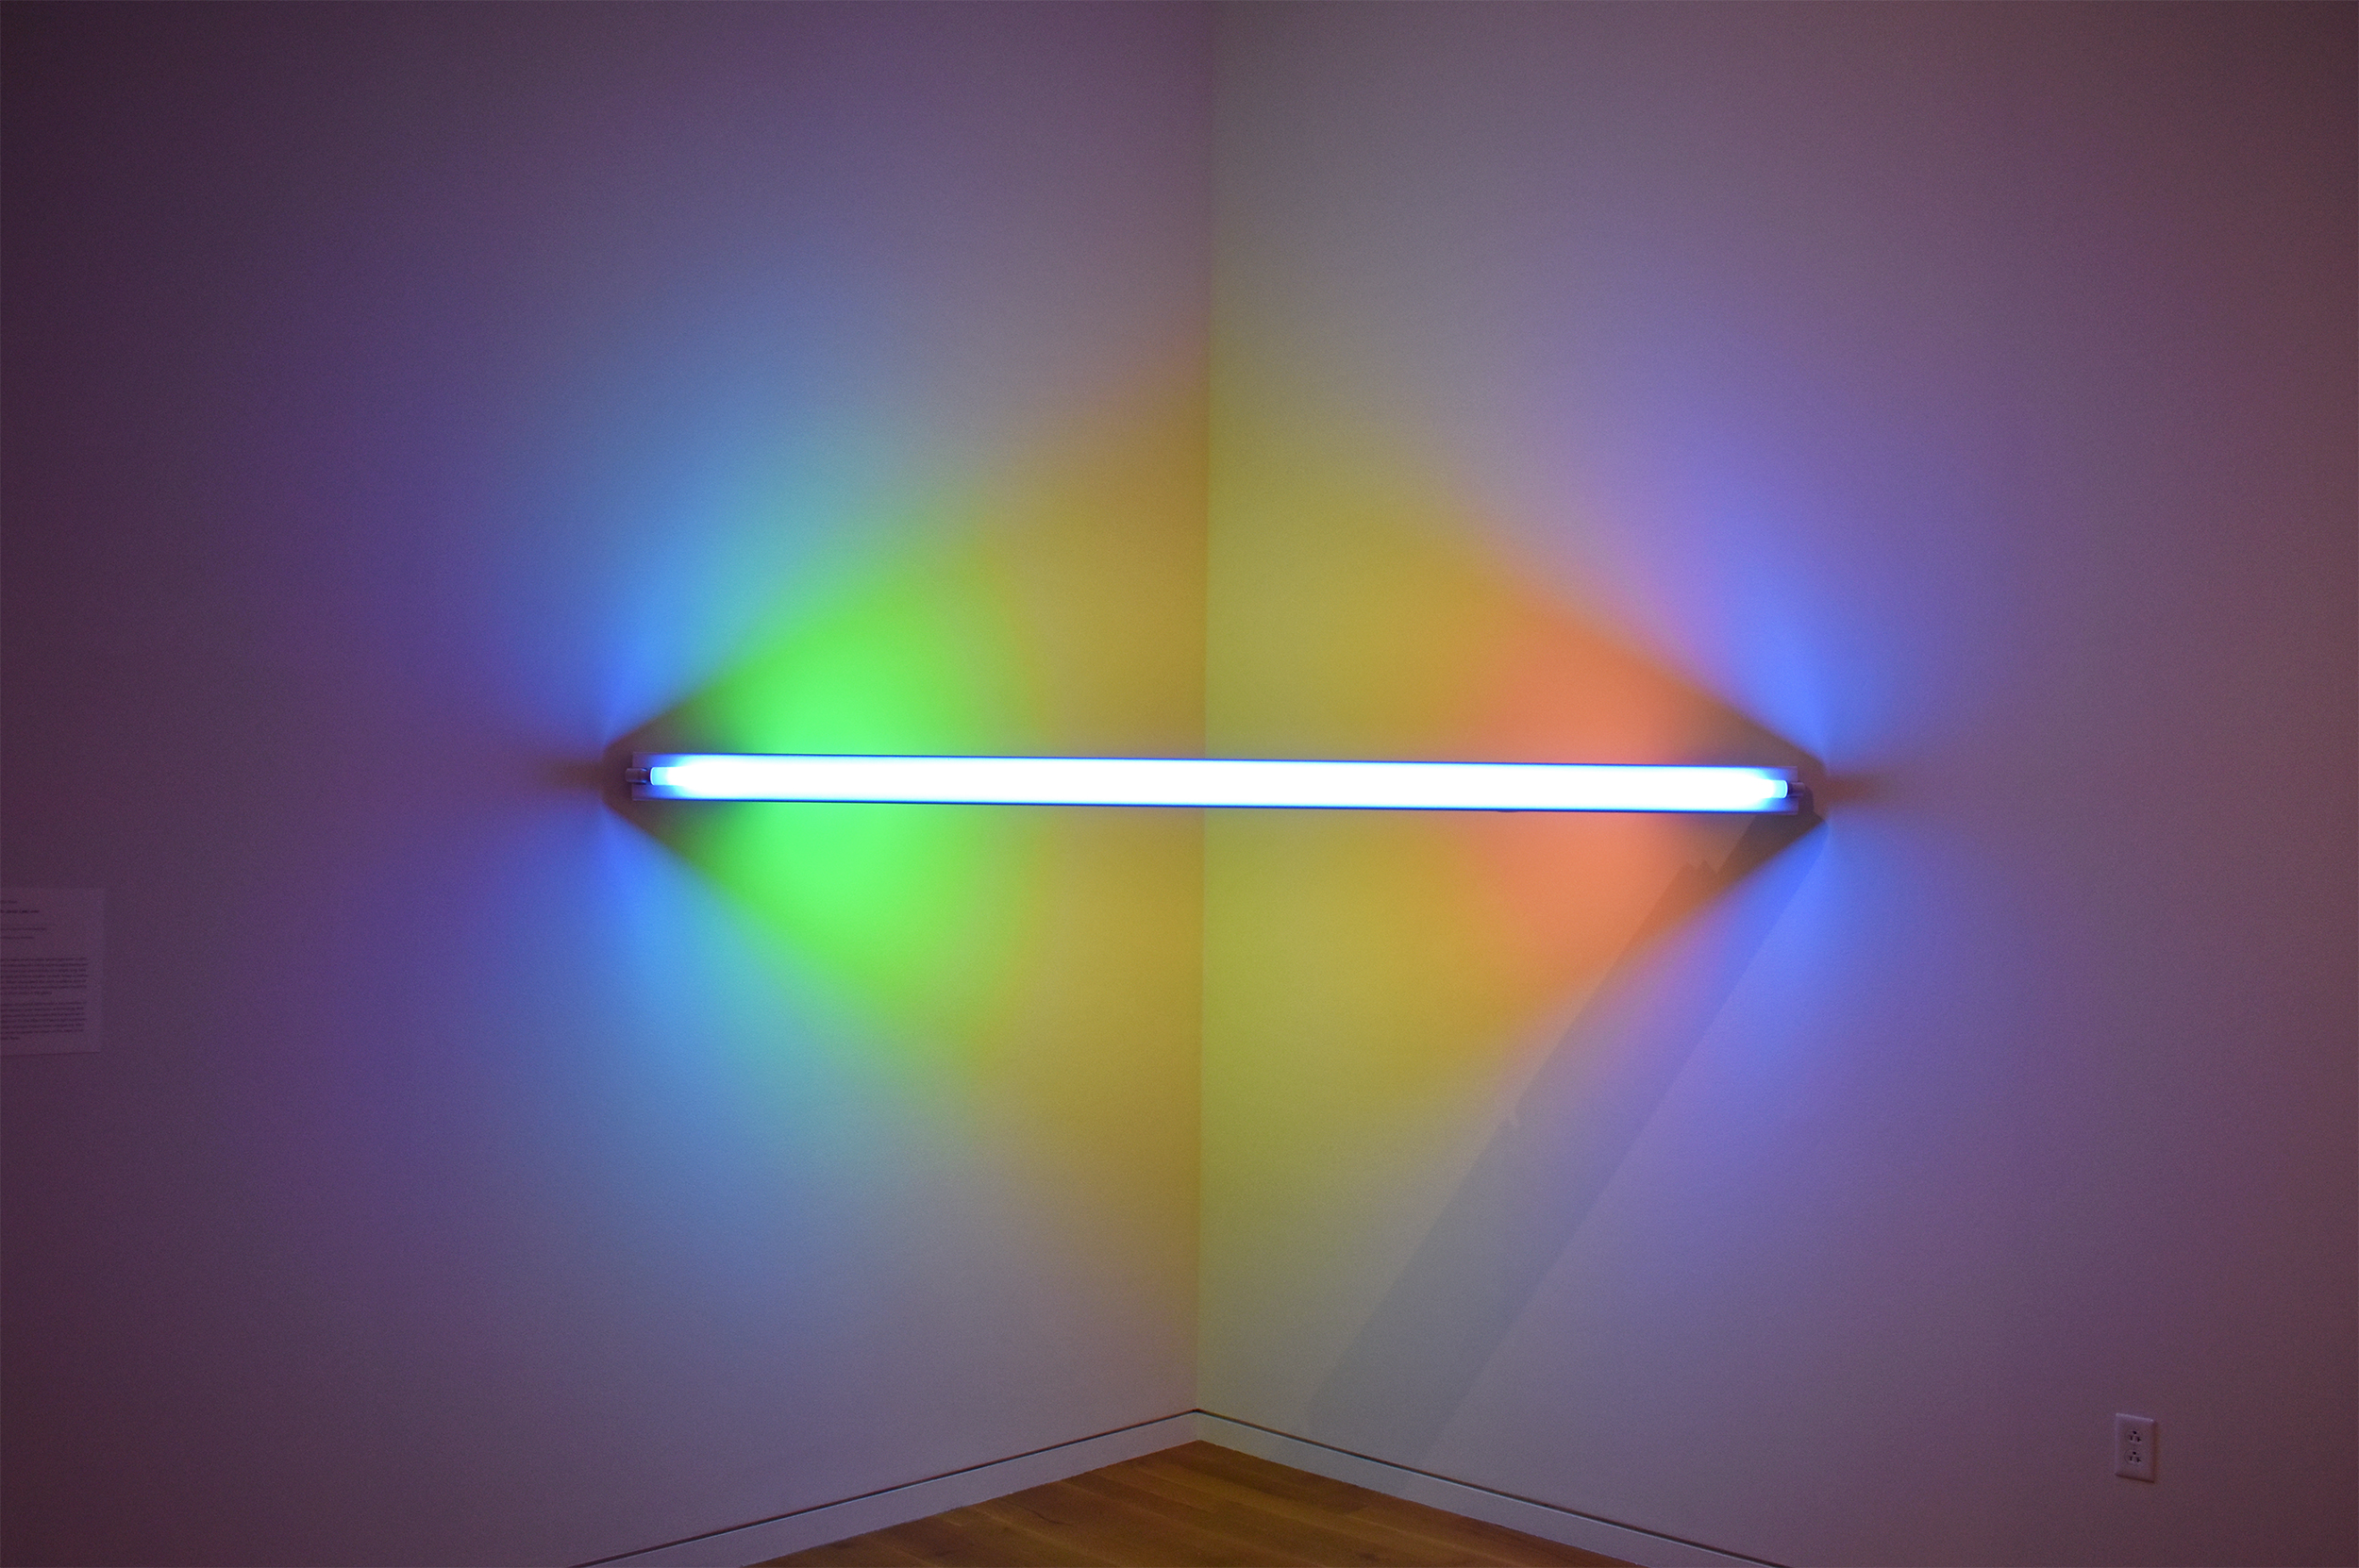 Dan Flavin, Untitled (to Janie Lee) one, 1971. Blue, pink, yellow, and green fluorescent light. Gift of Mr. and Mrs. William King Westwater